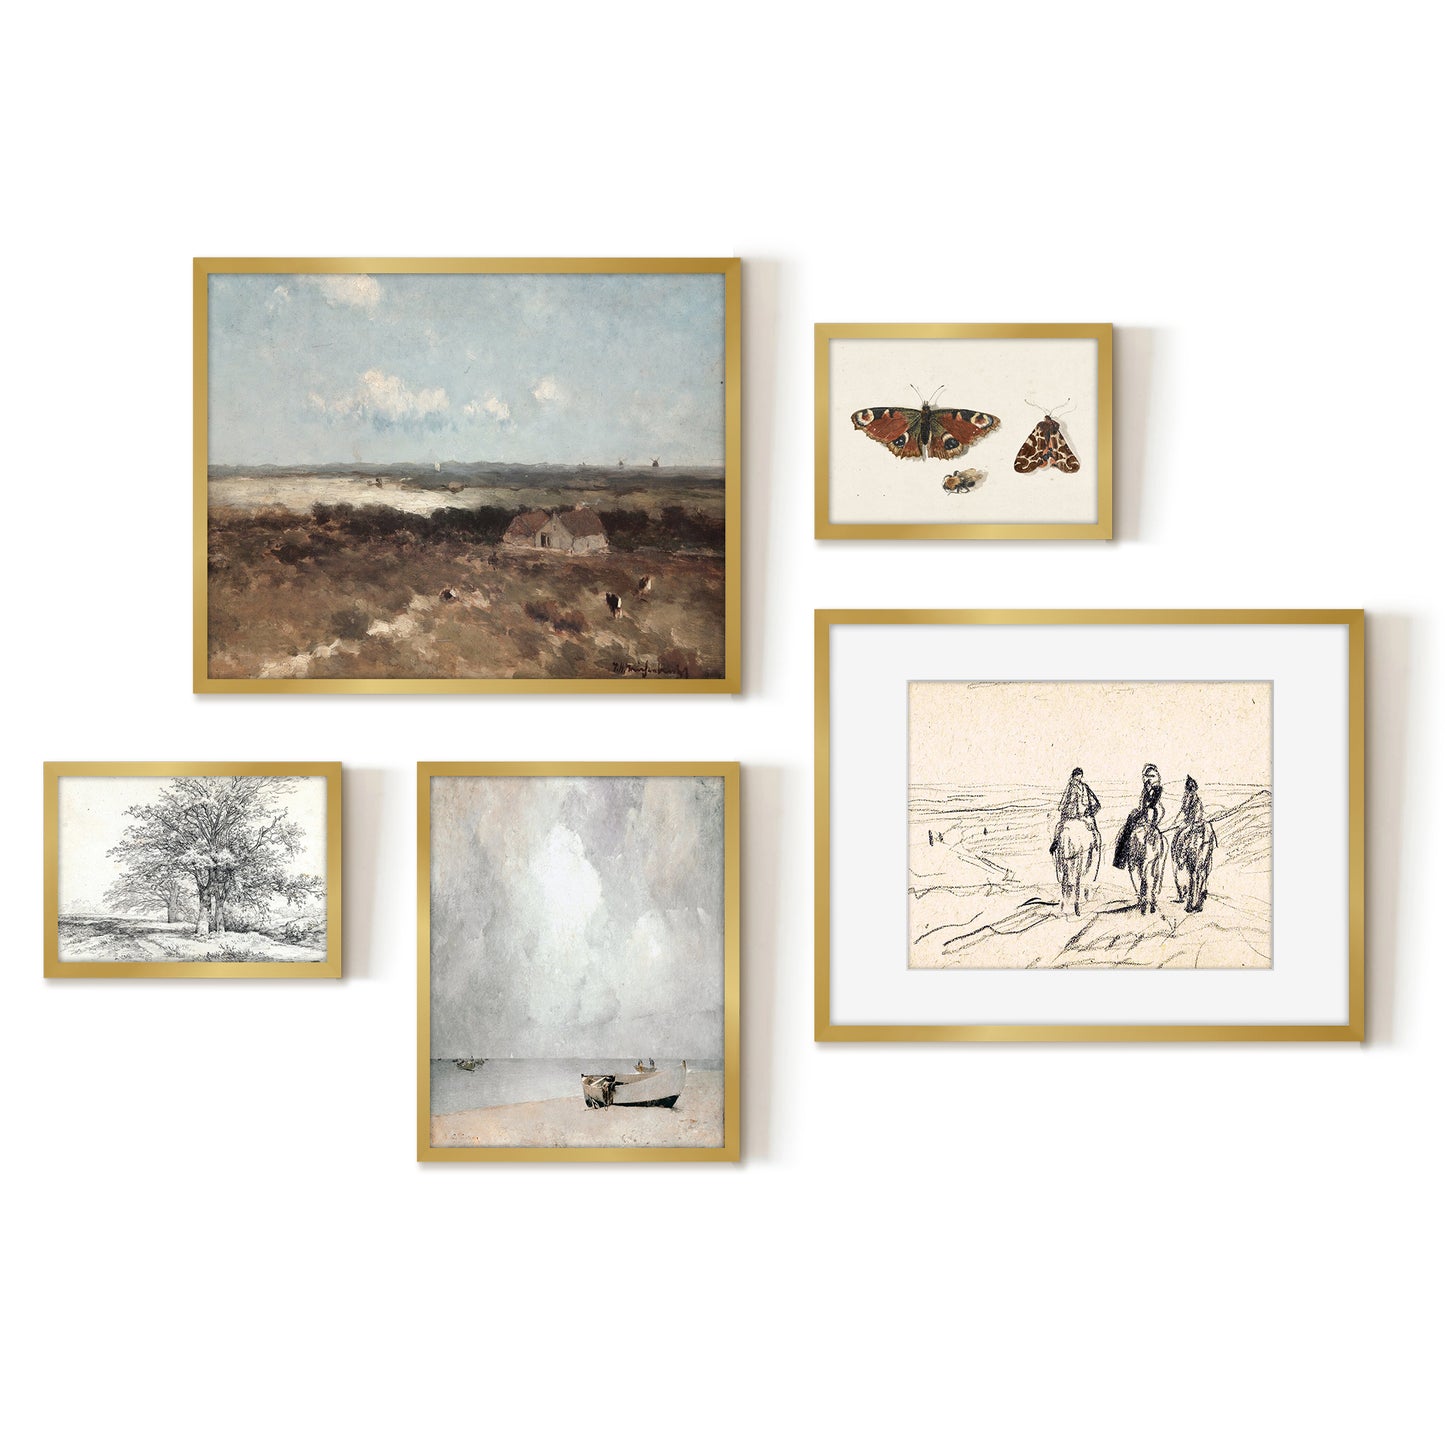 5 Piece Vintage Gallery Wall Art Set - Captured Whimsy Art by Wall + Wonder